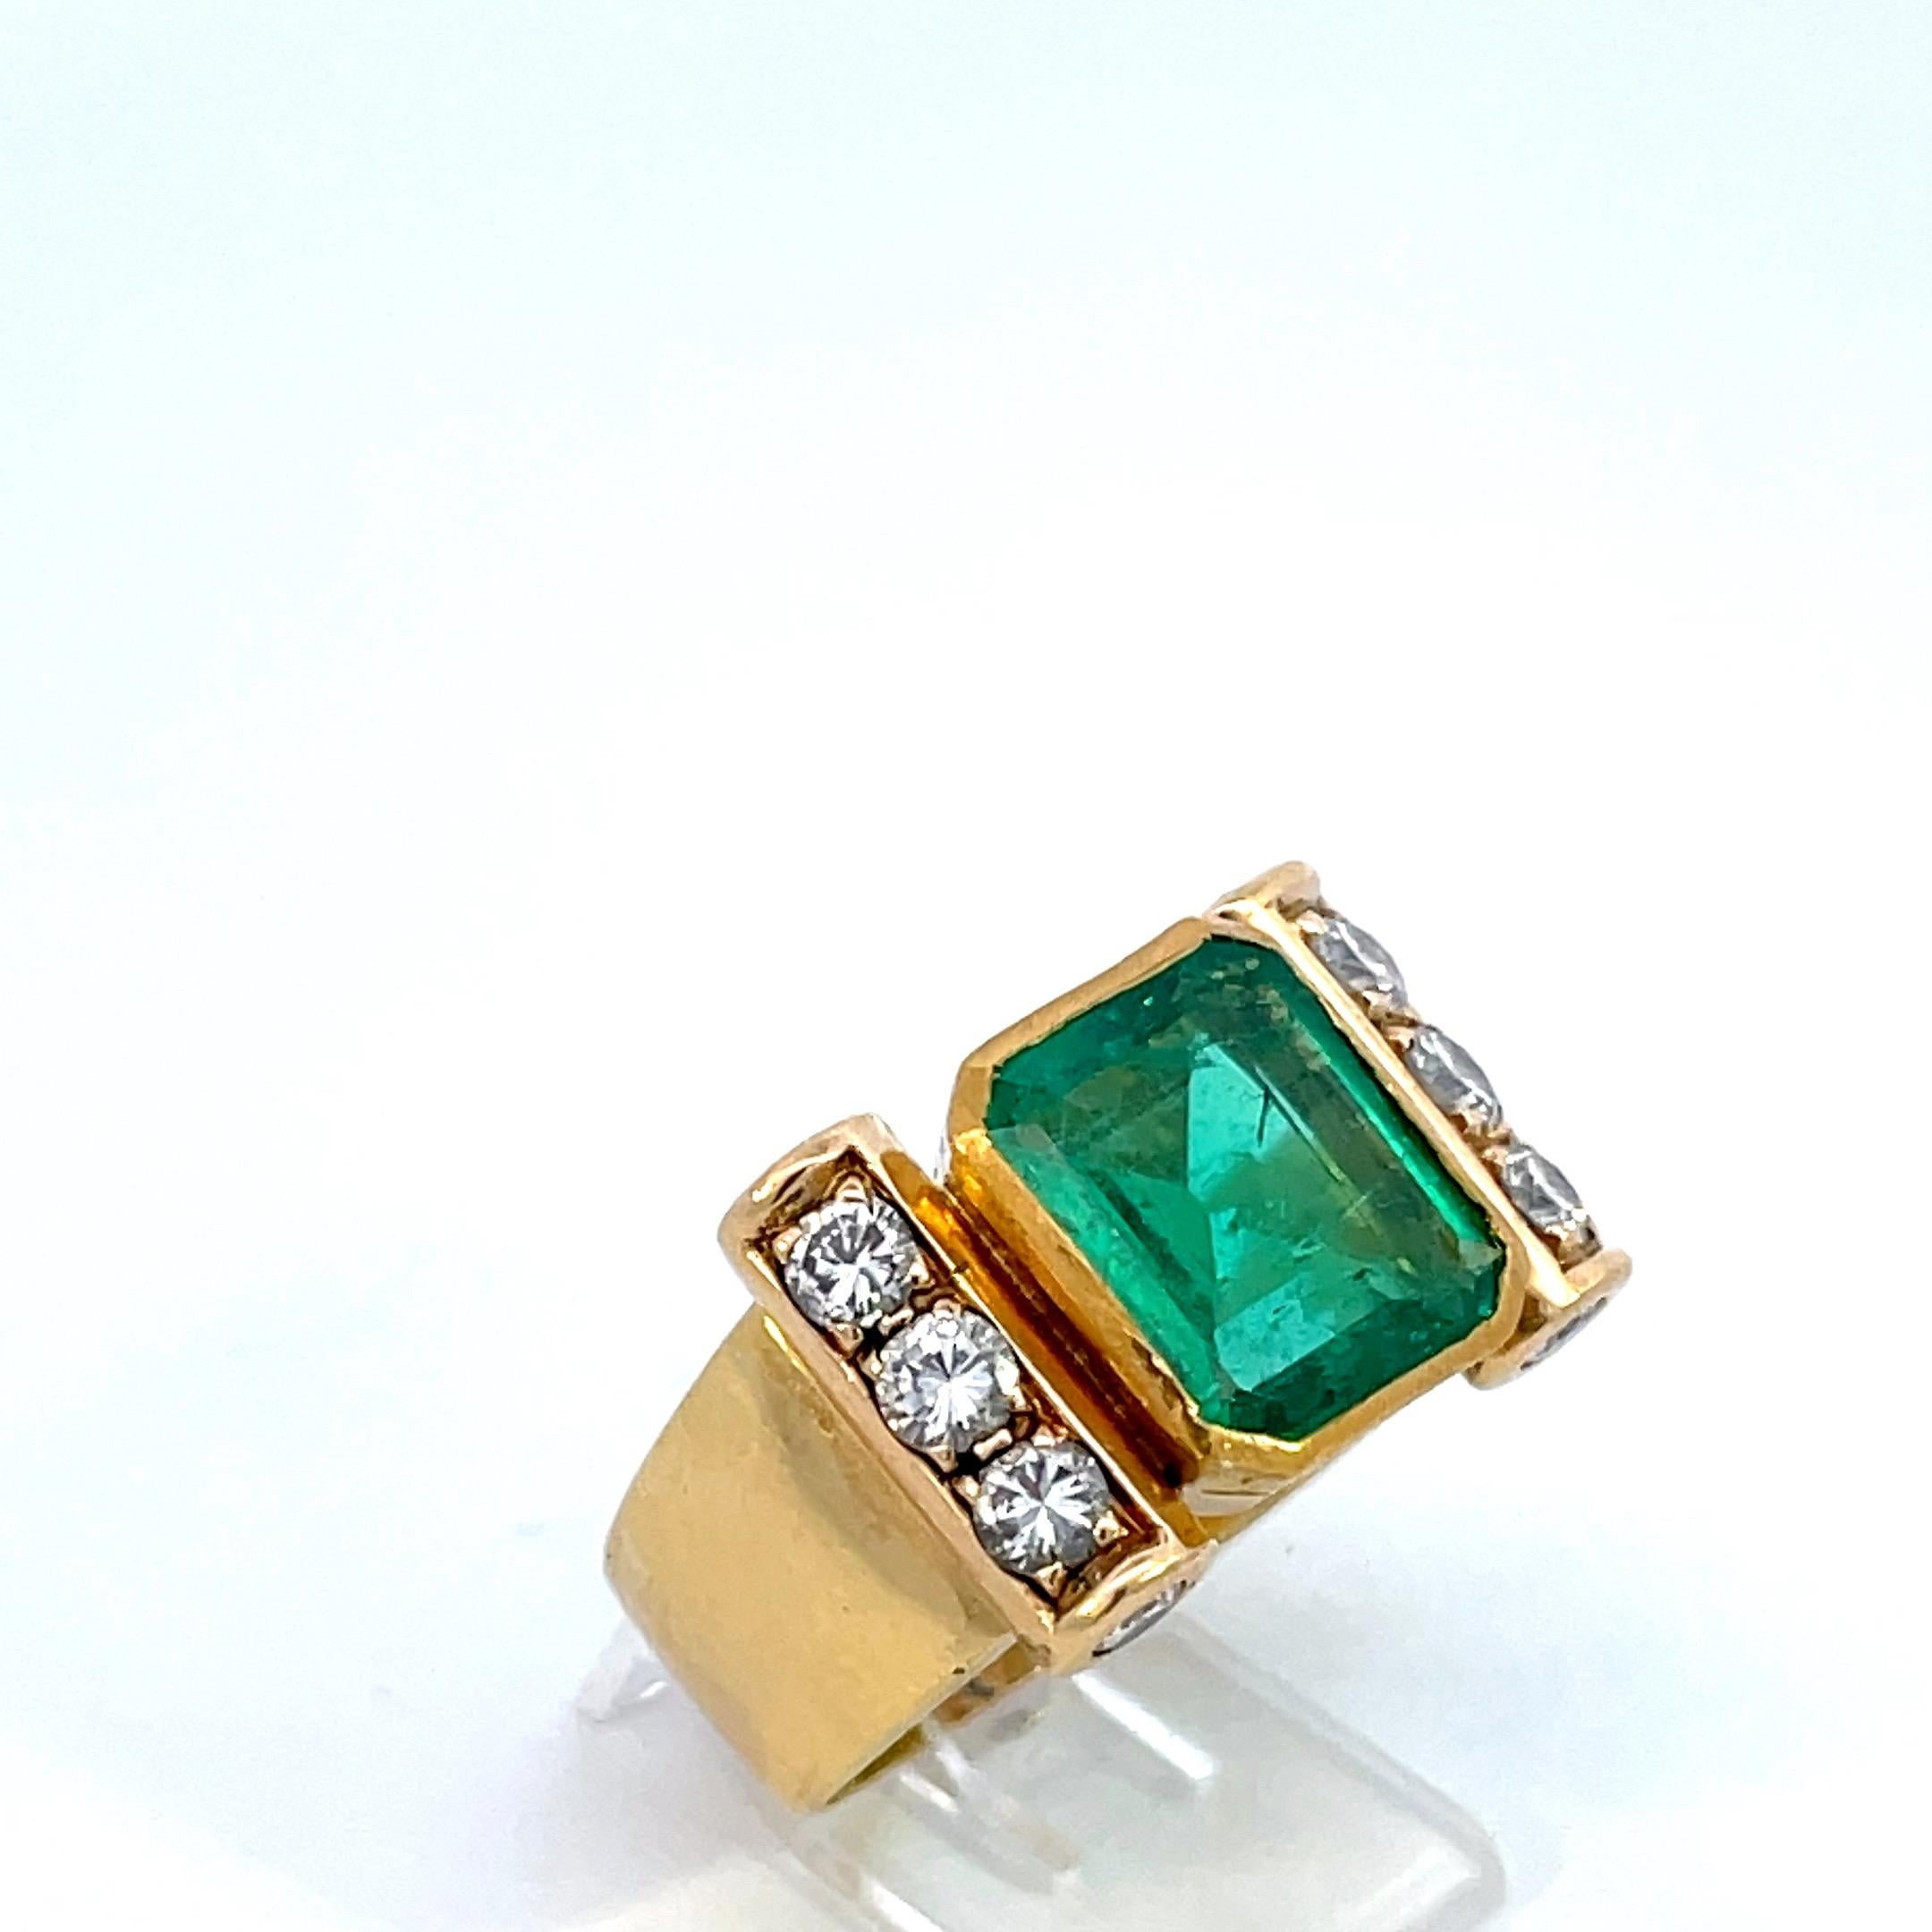 Beautiful 3.40 ct Colombia Minor Oil Emerald, settled in a 18kt yellow gold and diamonds  ring.
Certificate GRS Stating the 3.40 cts emerald to be Colombia Minor Oil traditional type.
The stone has a nice old  saturated Green colour and is very